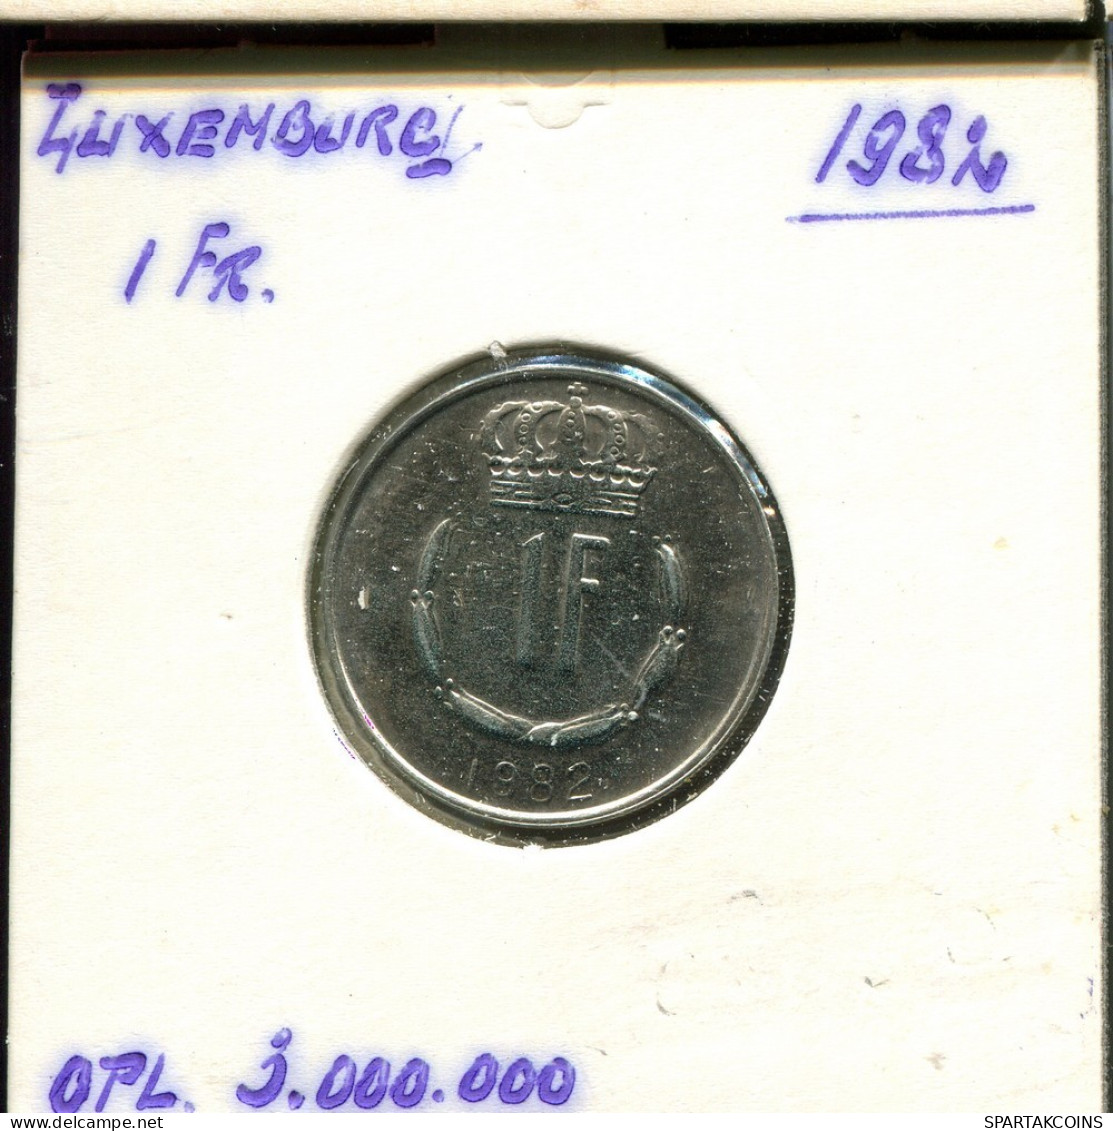 1 FRANC 1982 LUXEMBOURG Coin #AT218.U.A - Luxembourg